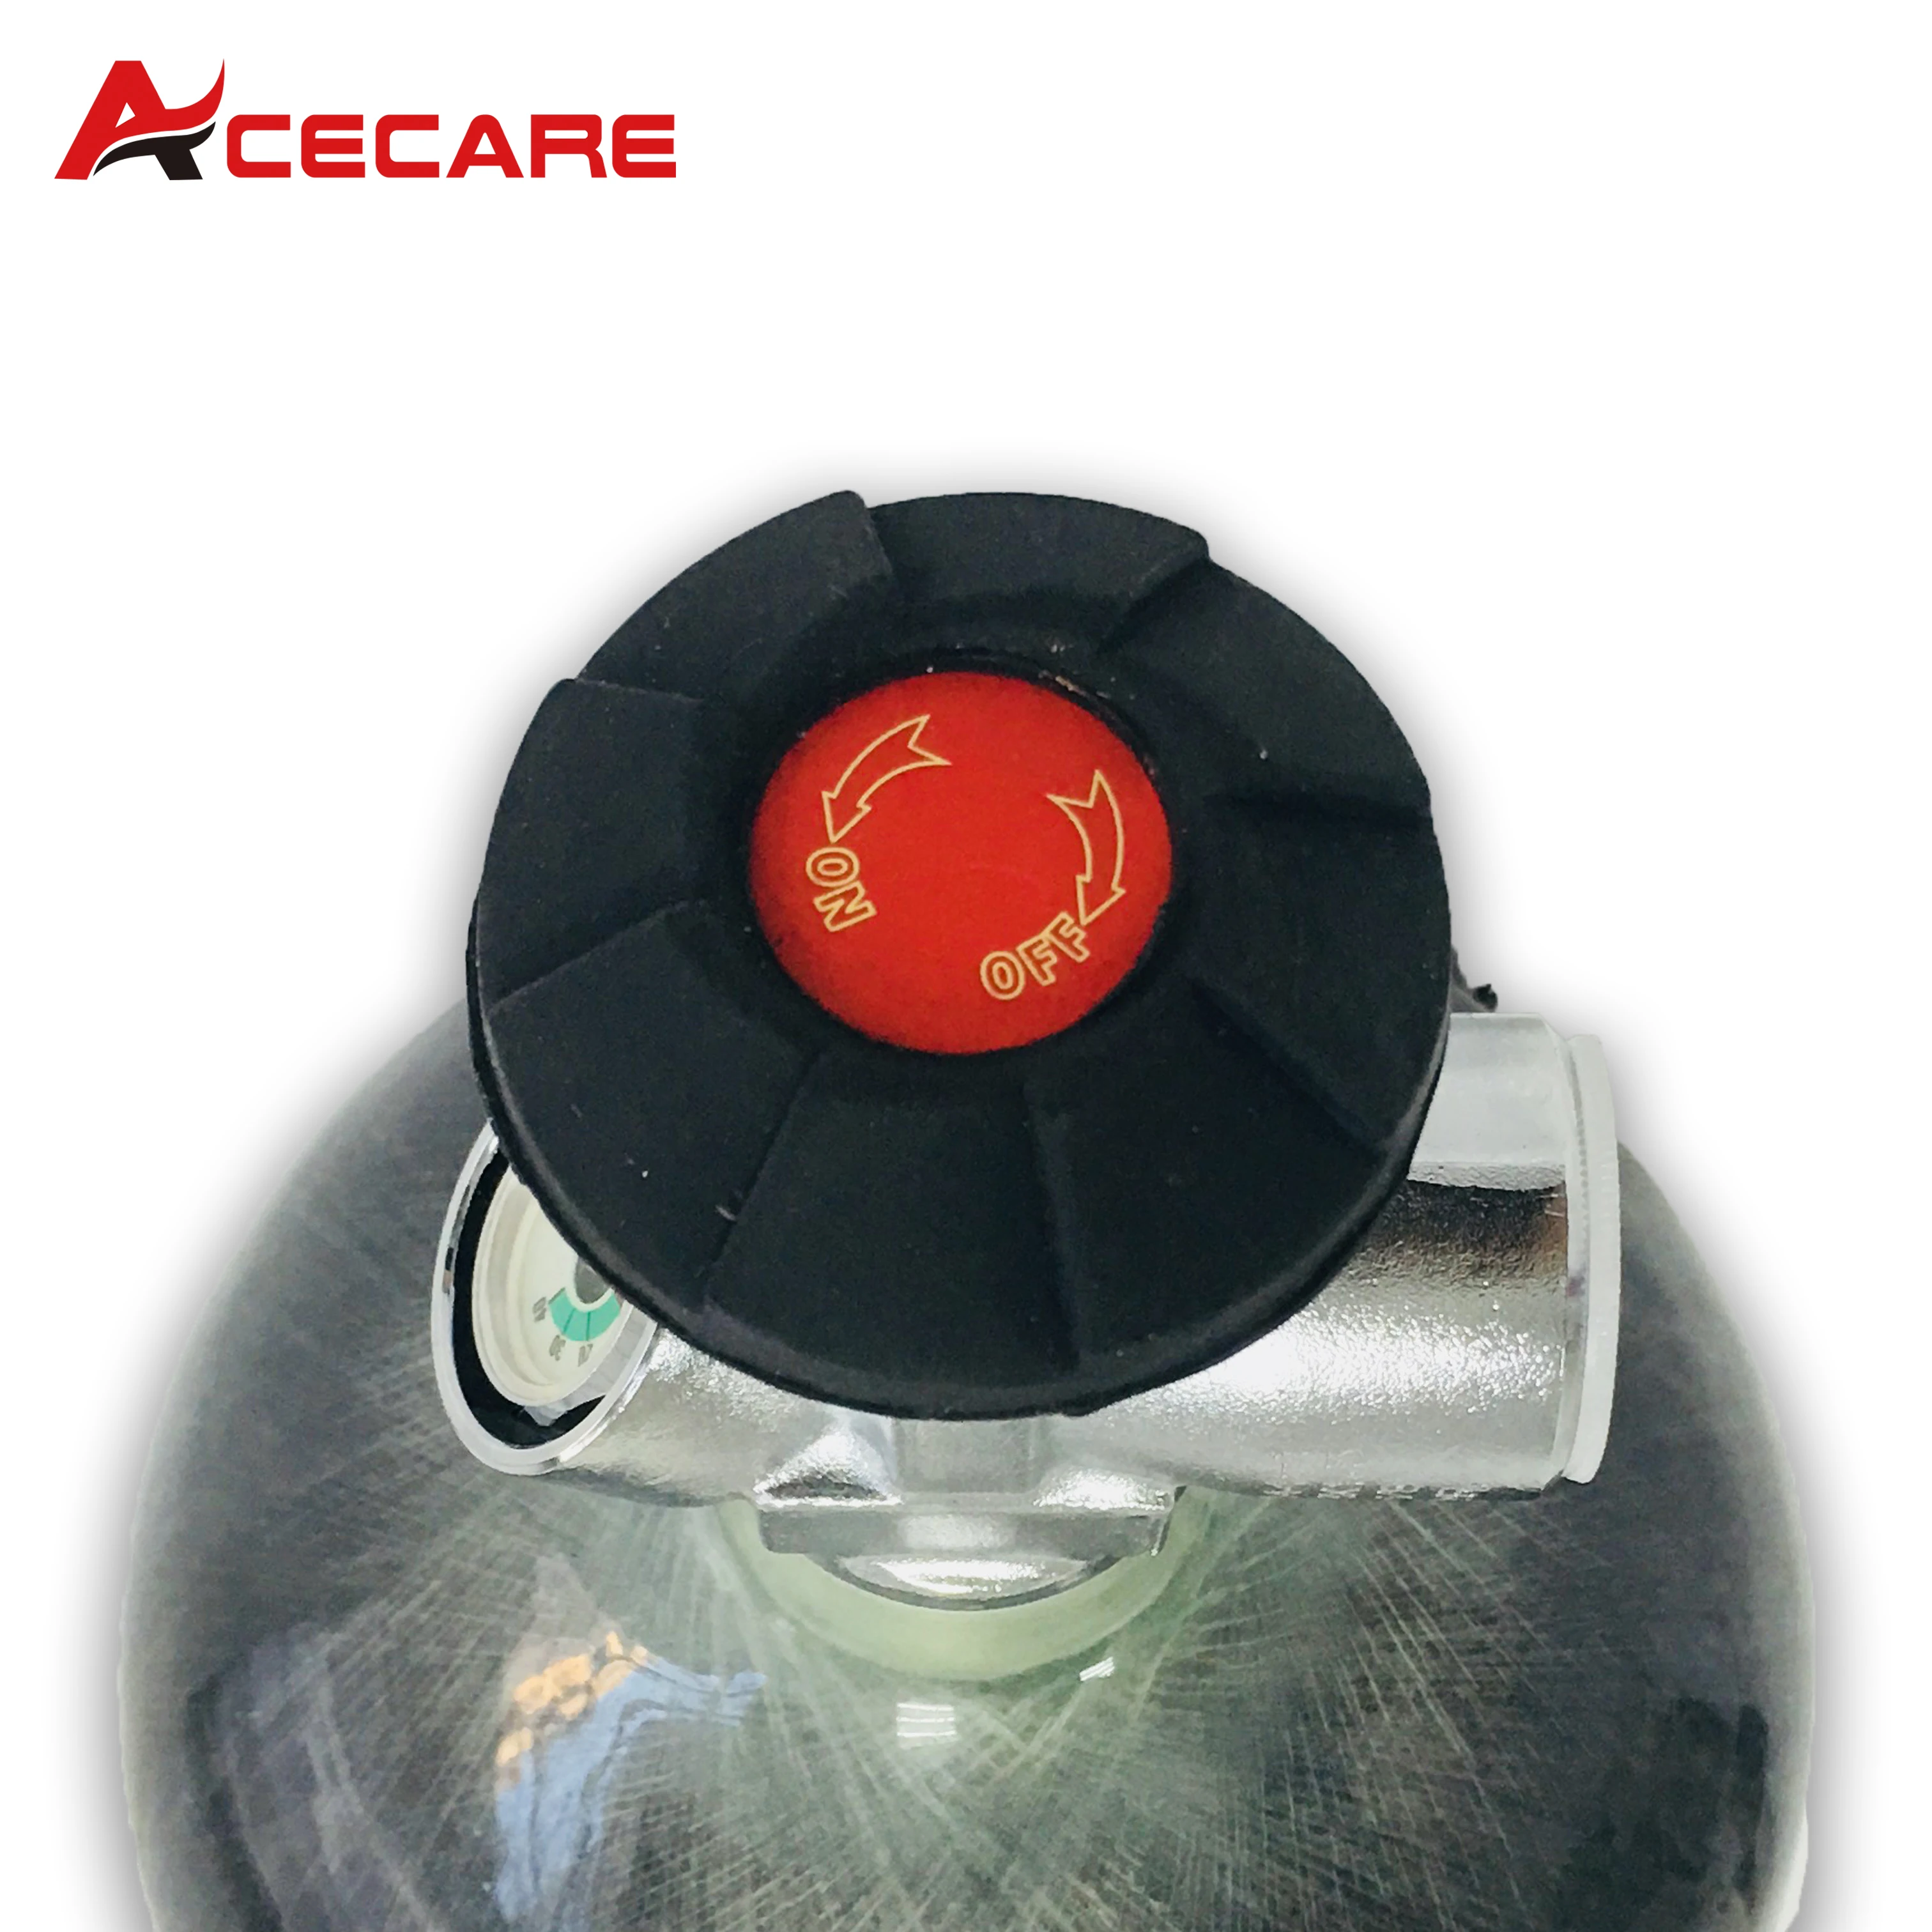 ACECARE AKH-X1 Gauged Valve 30Mpa High Pressure For Scuba Diving